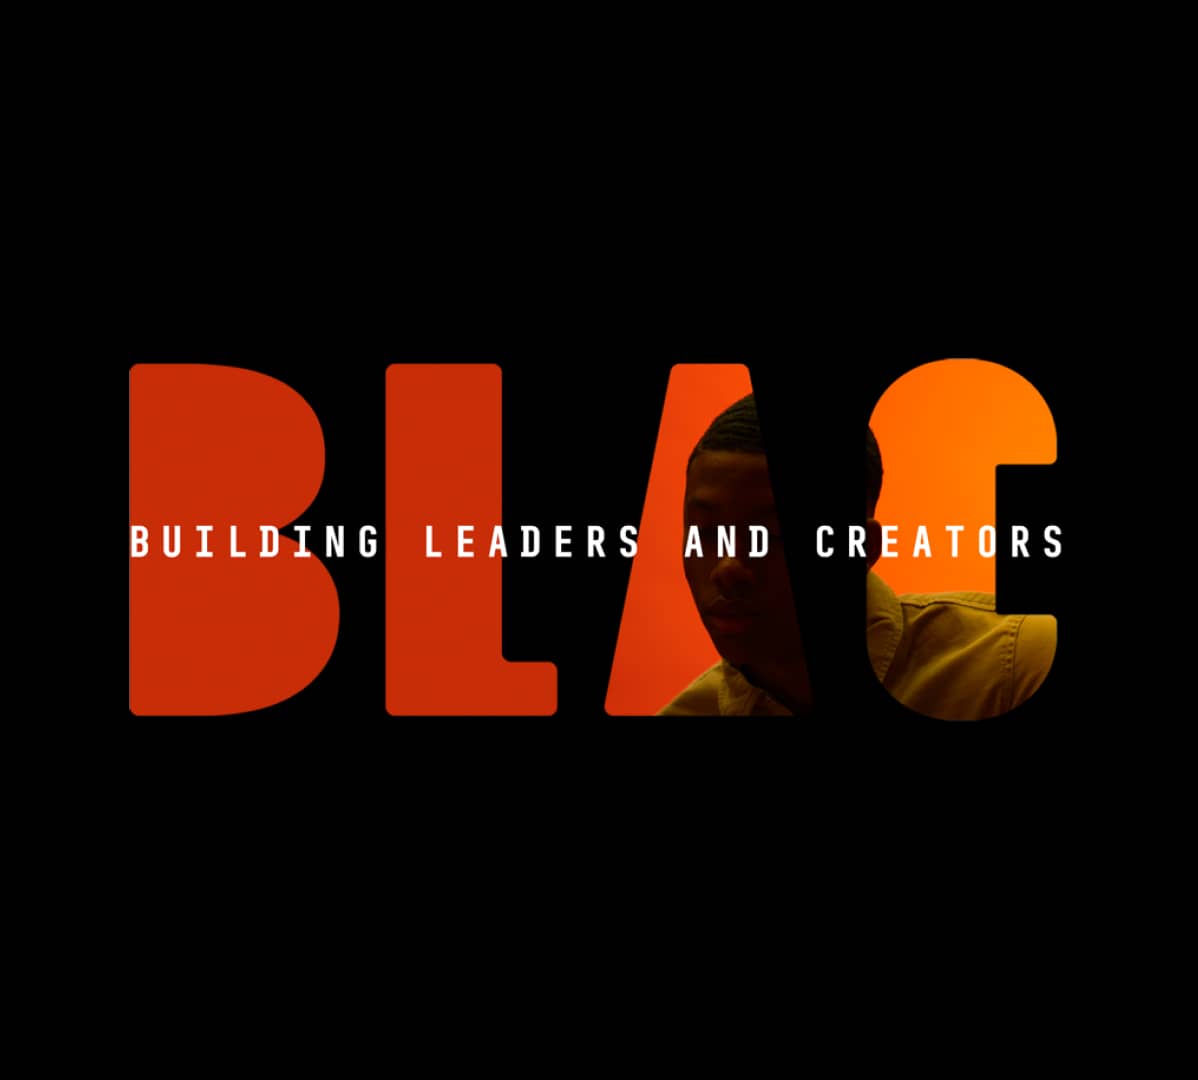 Blac: Building leaders and creators